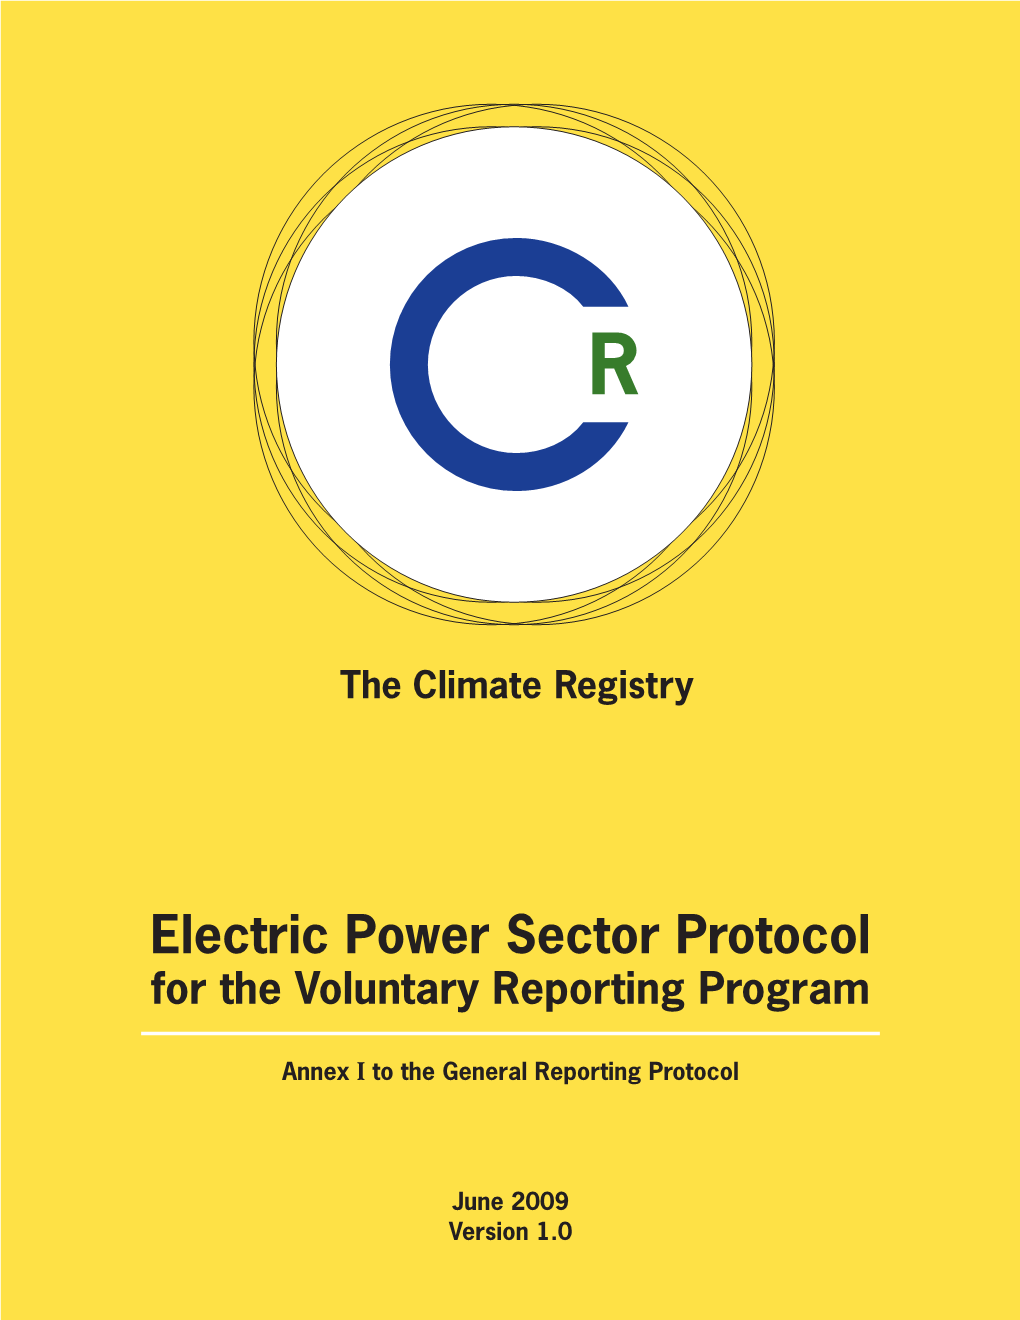 Electric Power Sector Protocol for the Voluntary Reporting Program